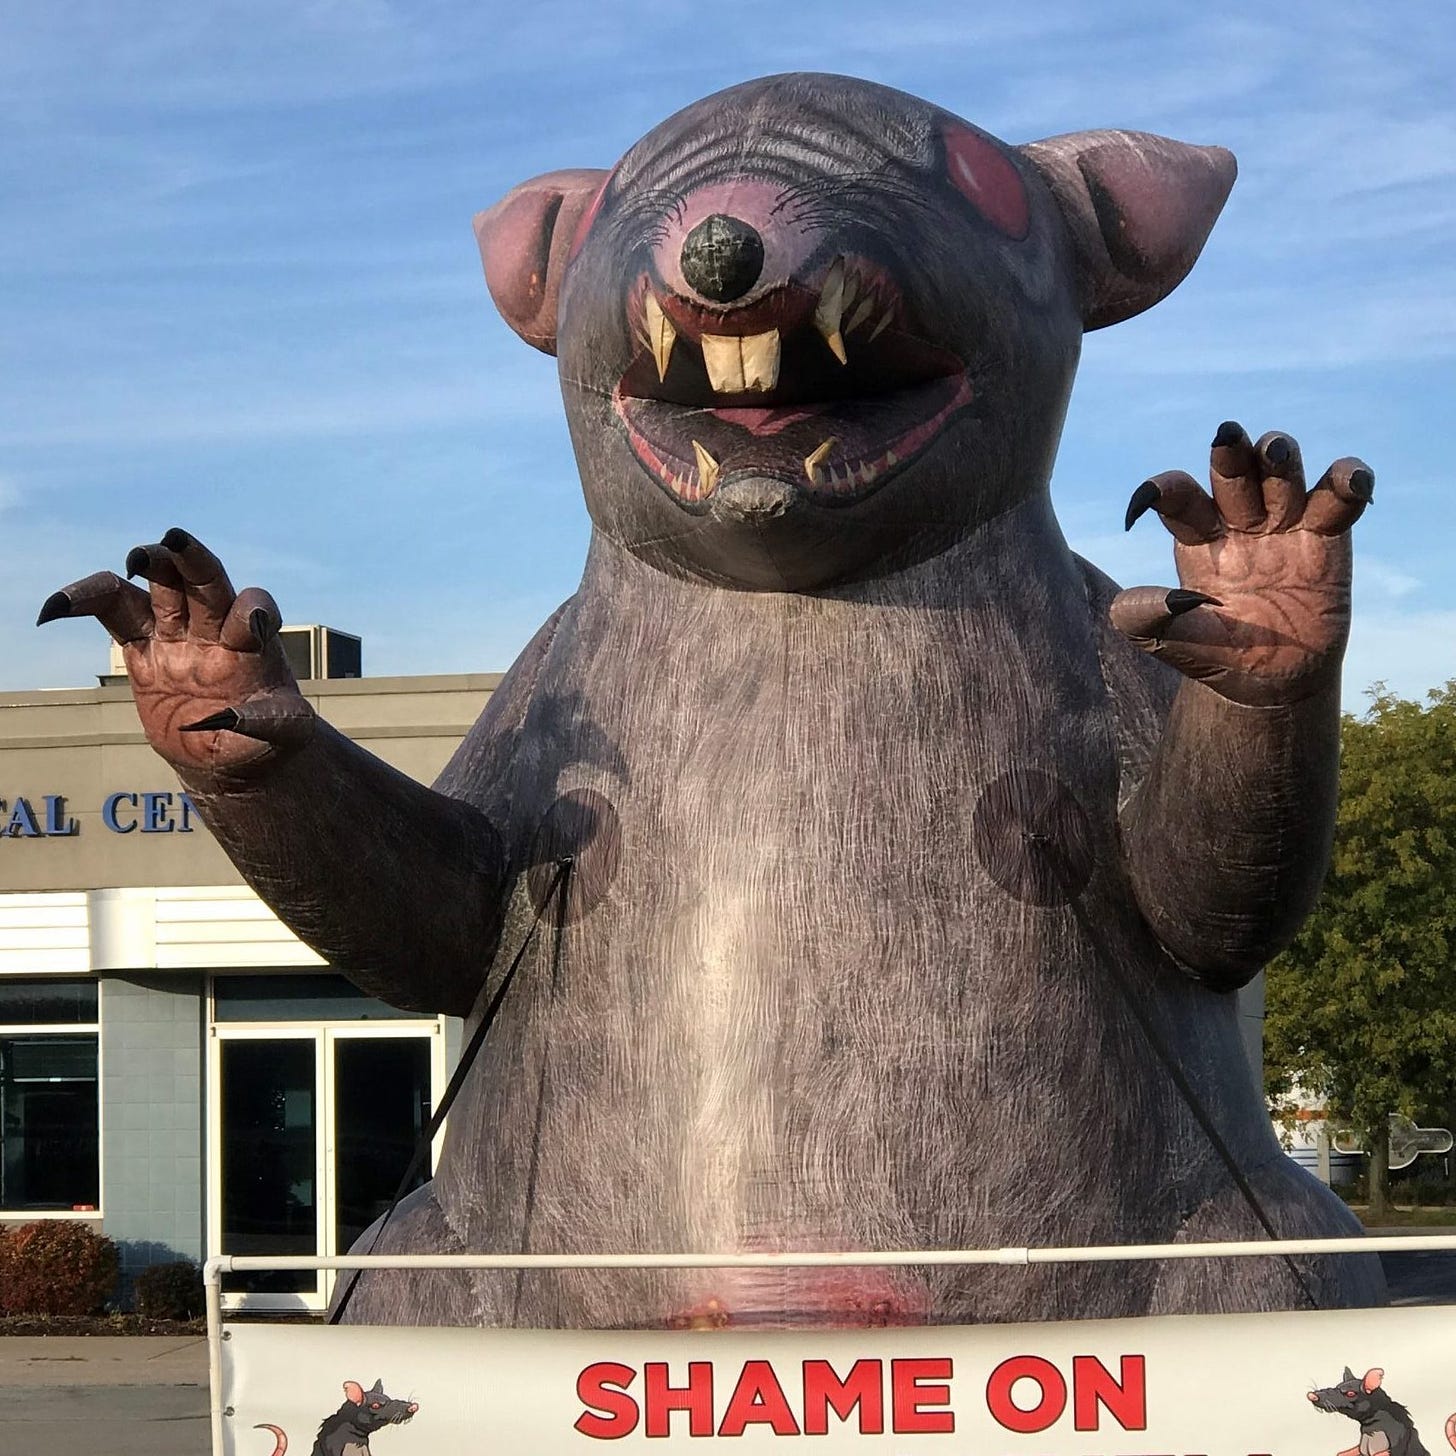 SCABBY WINS AGAIN! NLRB DISMISSES LAWSUIT THREATENING USE OF INFLATABLE RATS  - IUOE Local 150 | International Union Of Operating Engineers